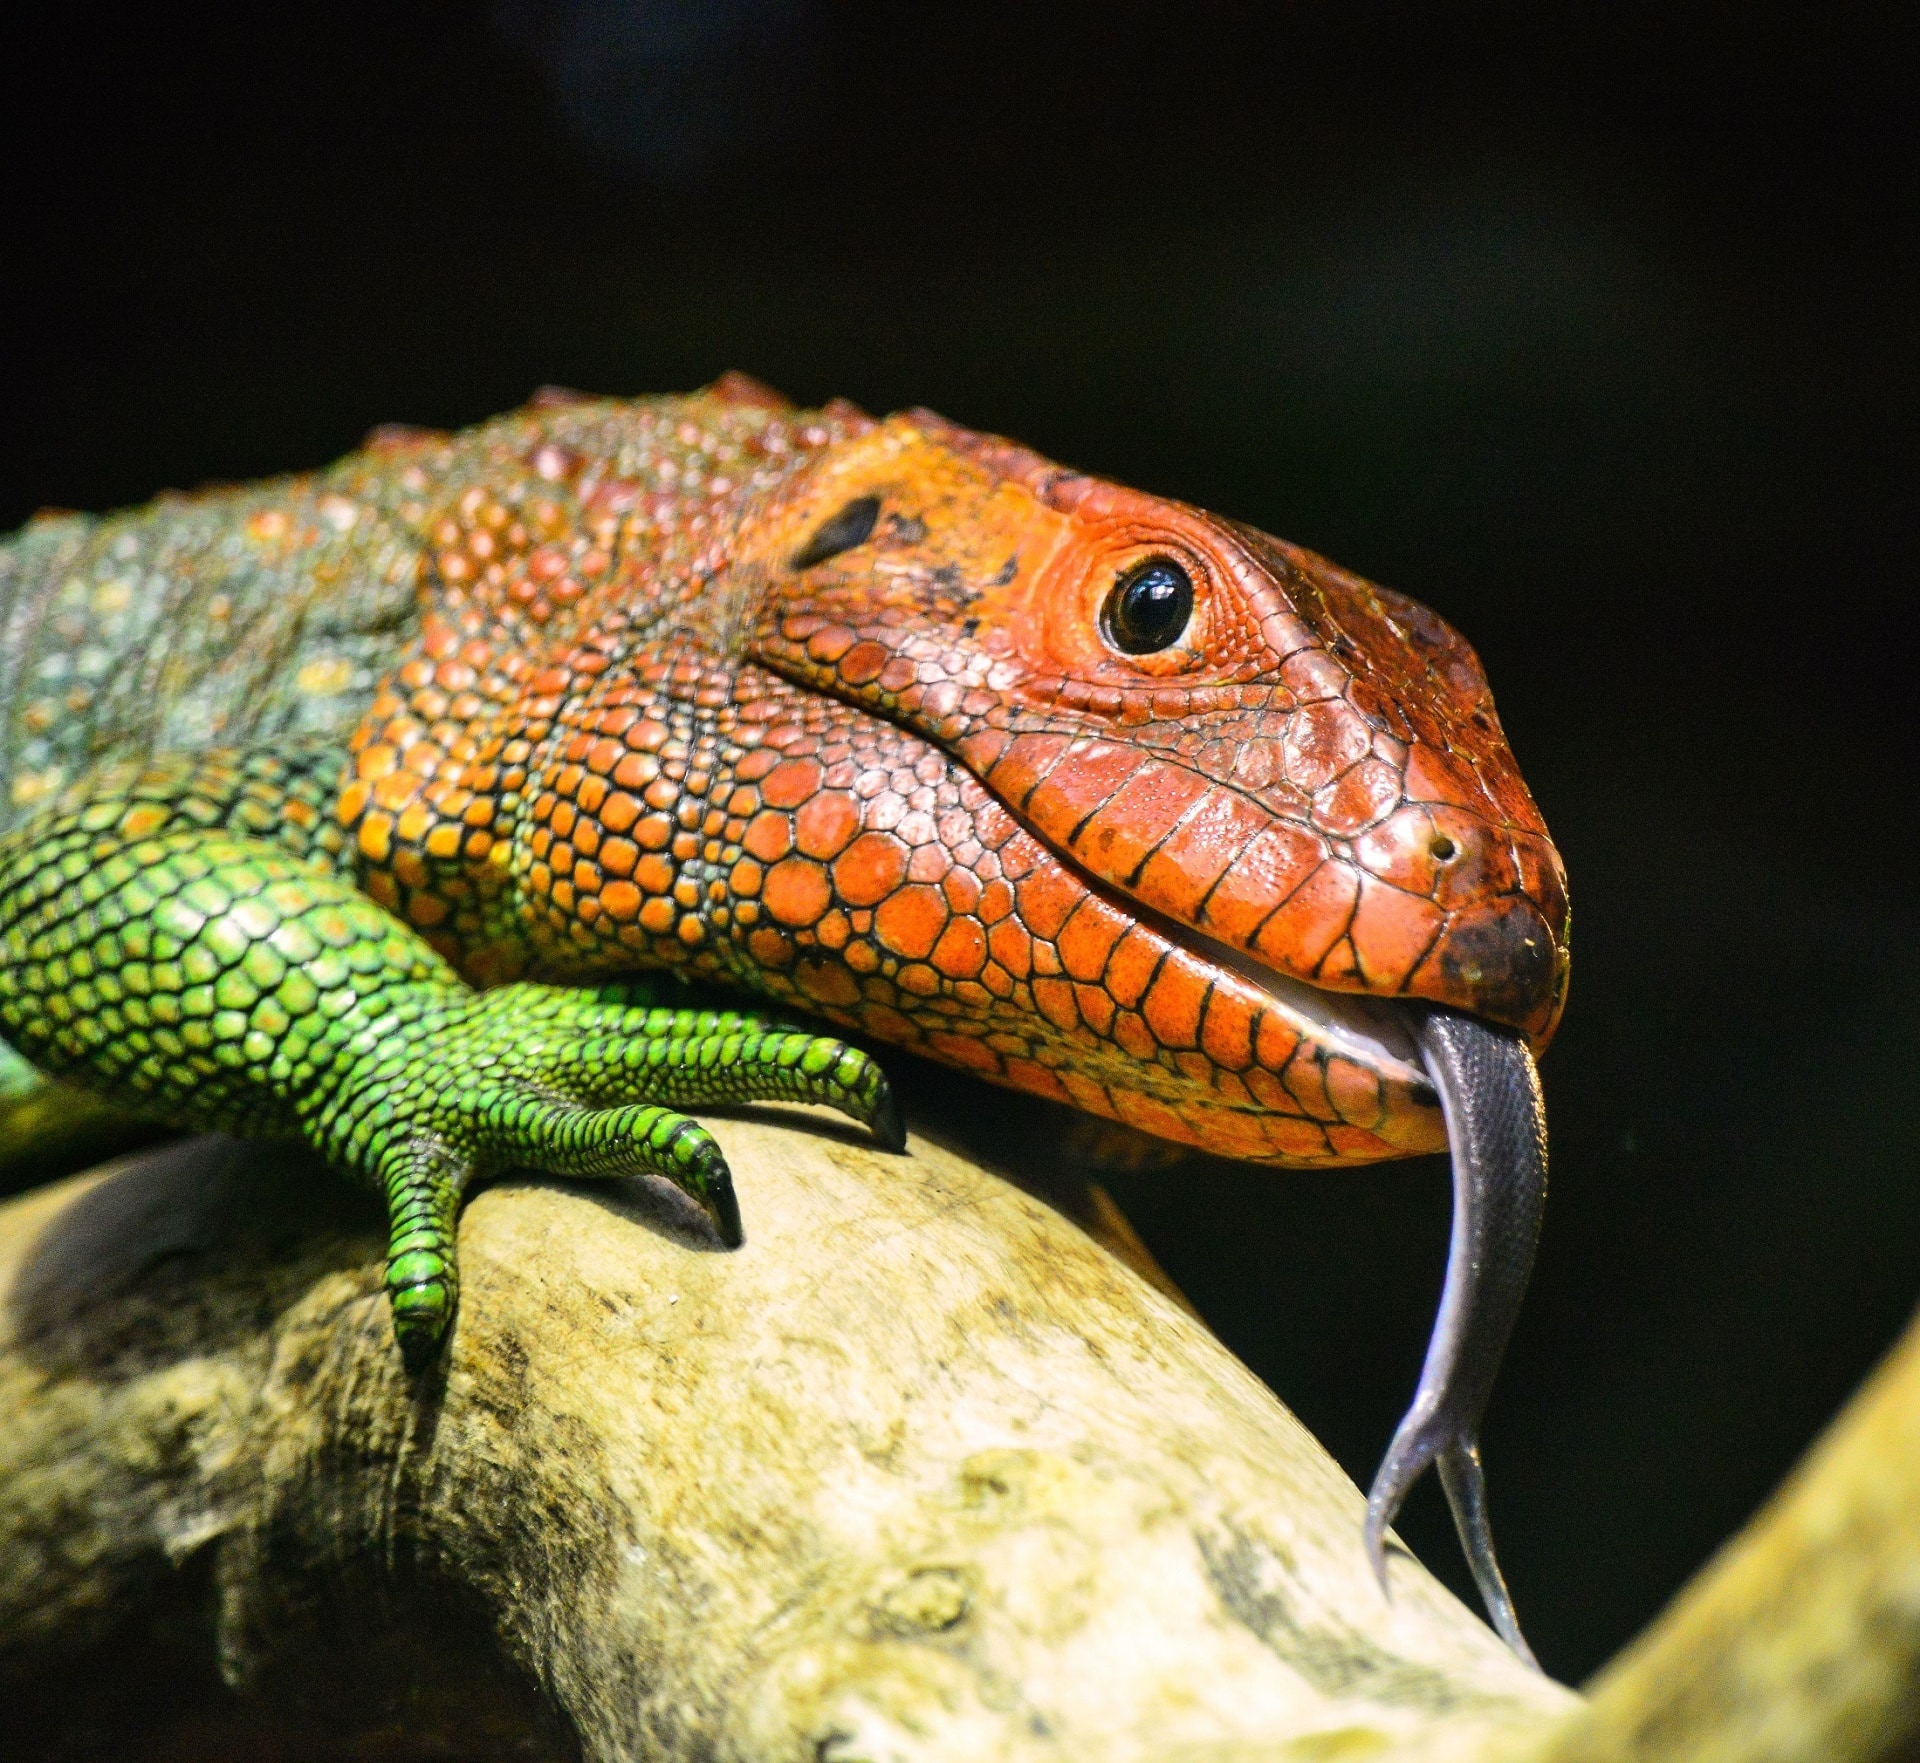 red and green lizard free image Peakpx